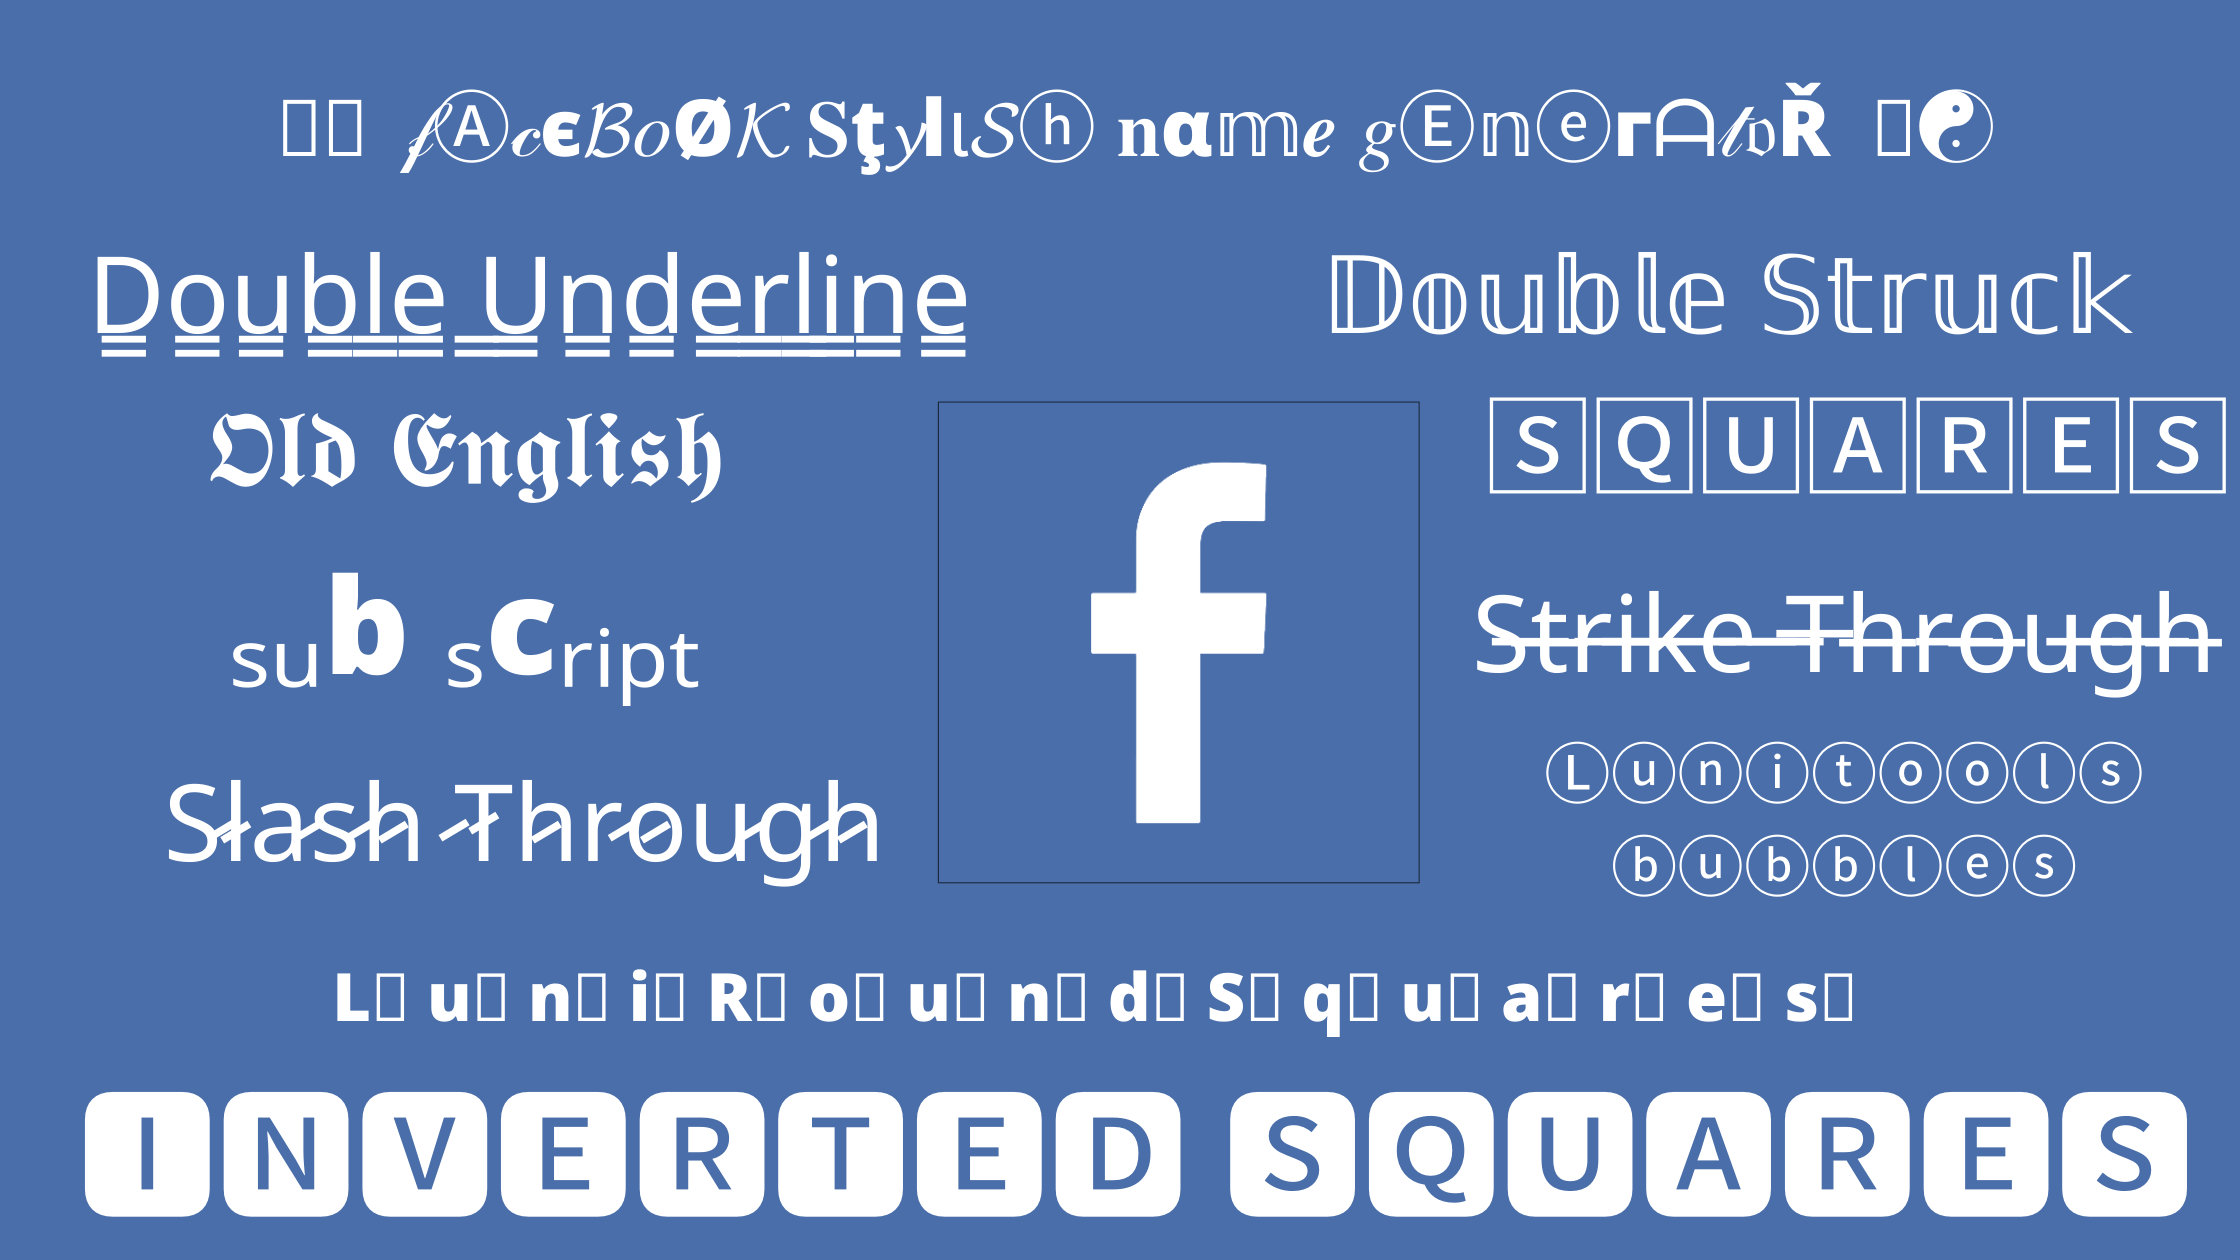 How to Create a Stylish Name on Facebook: A Step-by-Step Guide